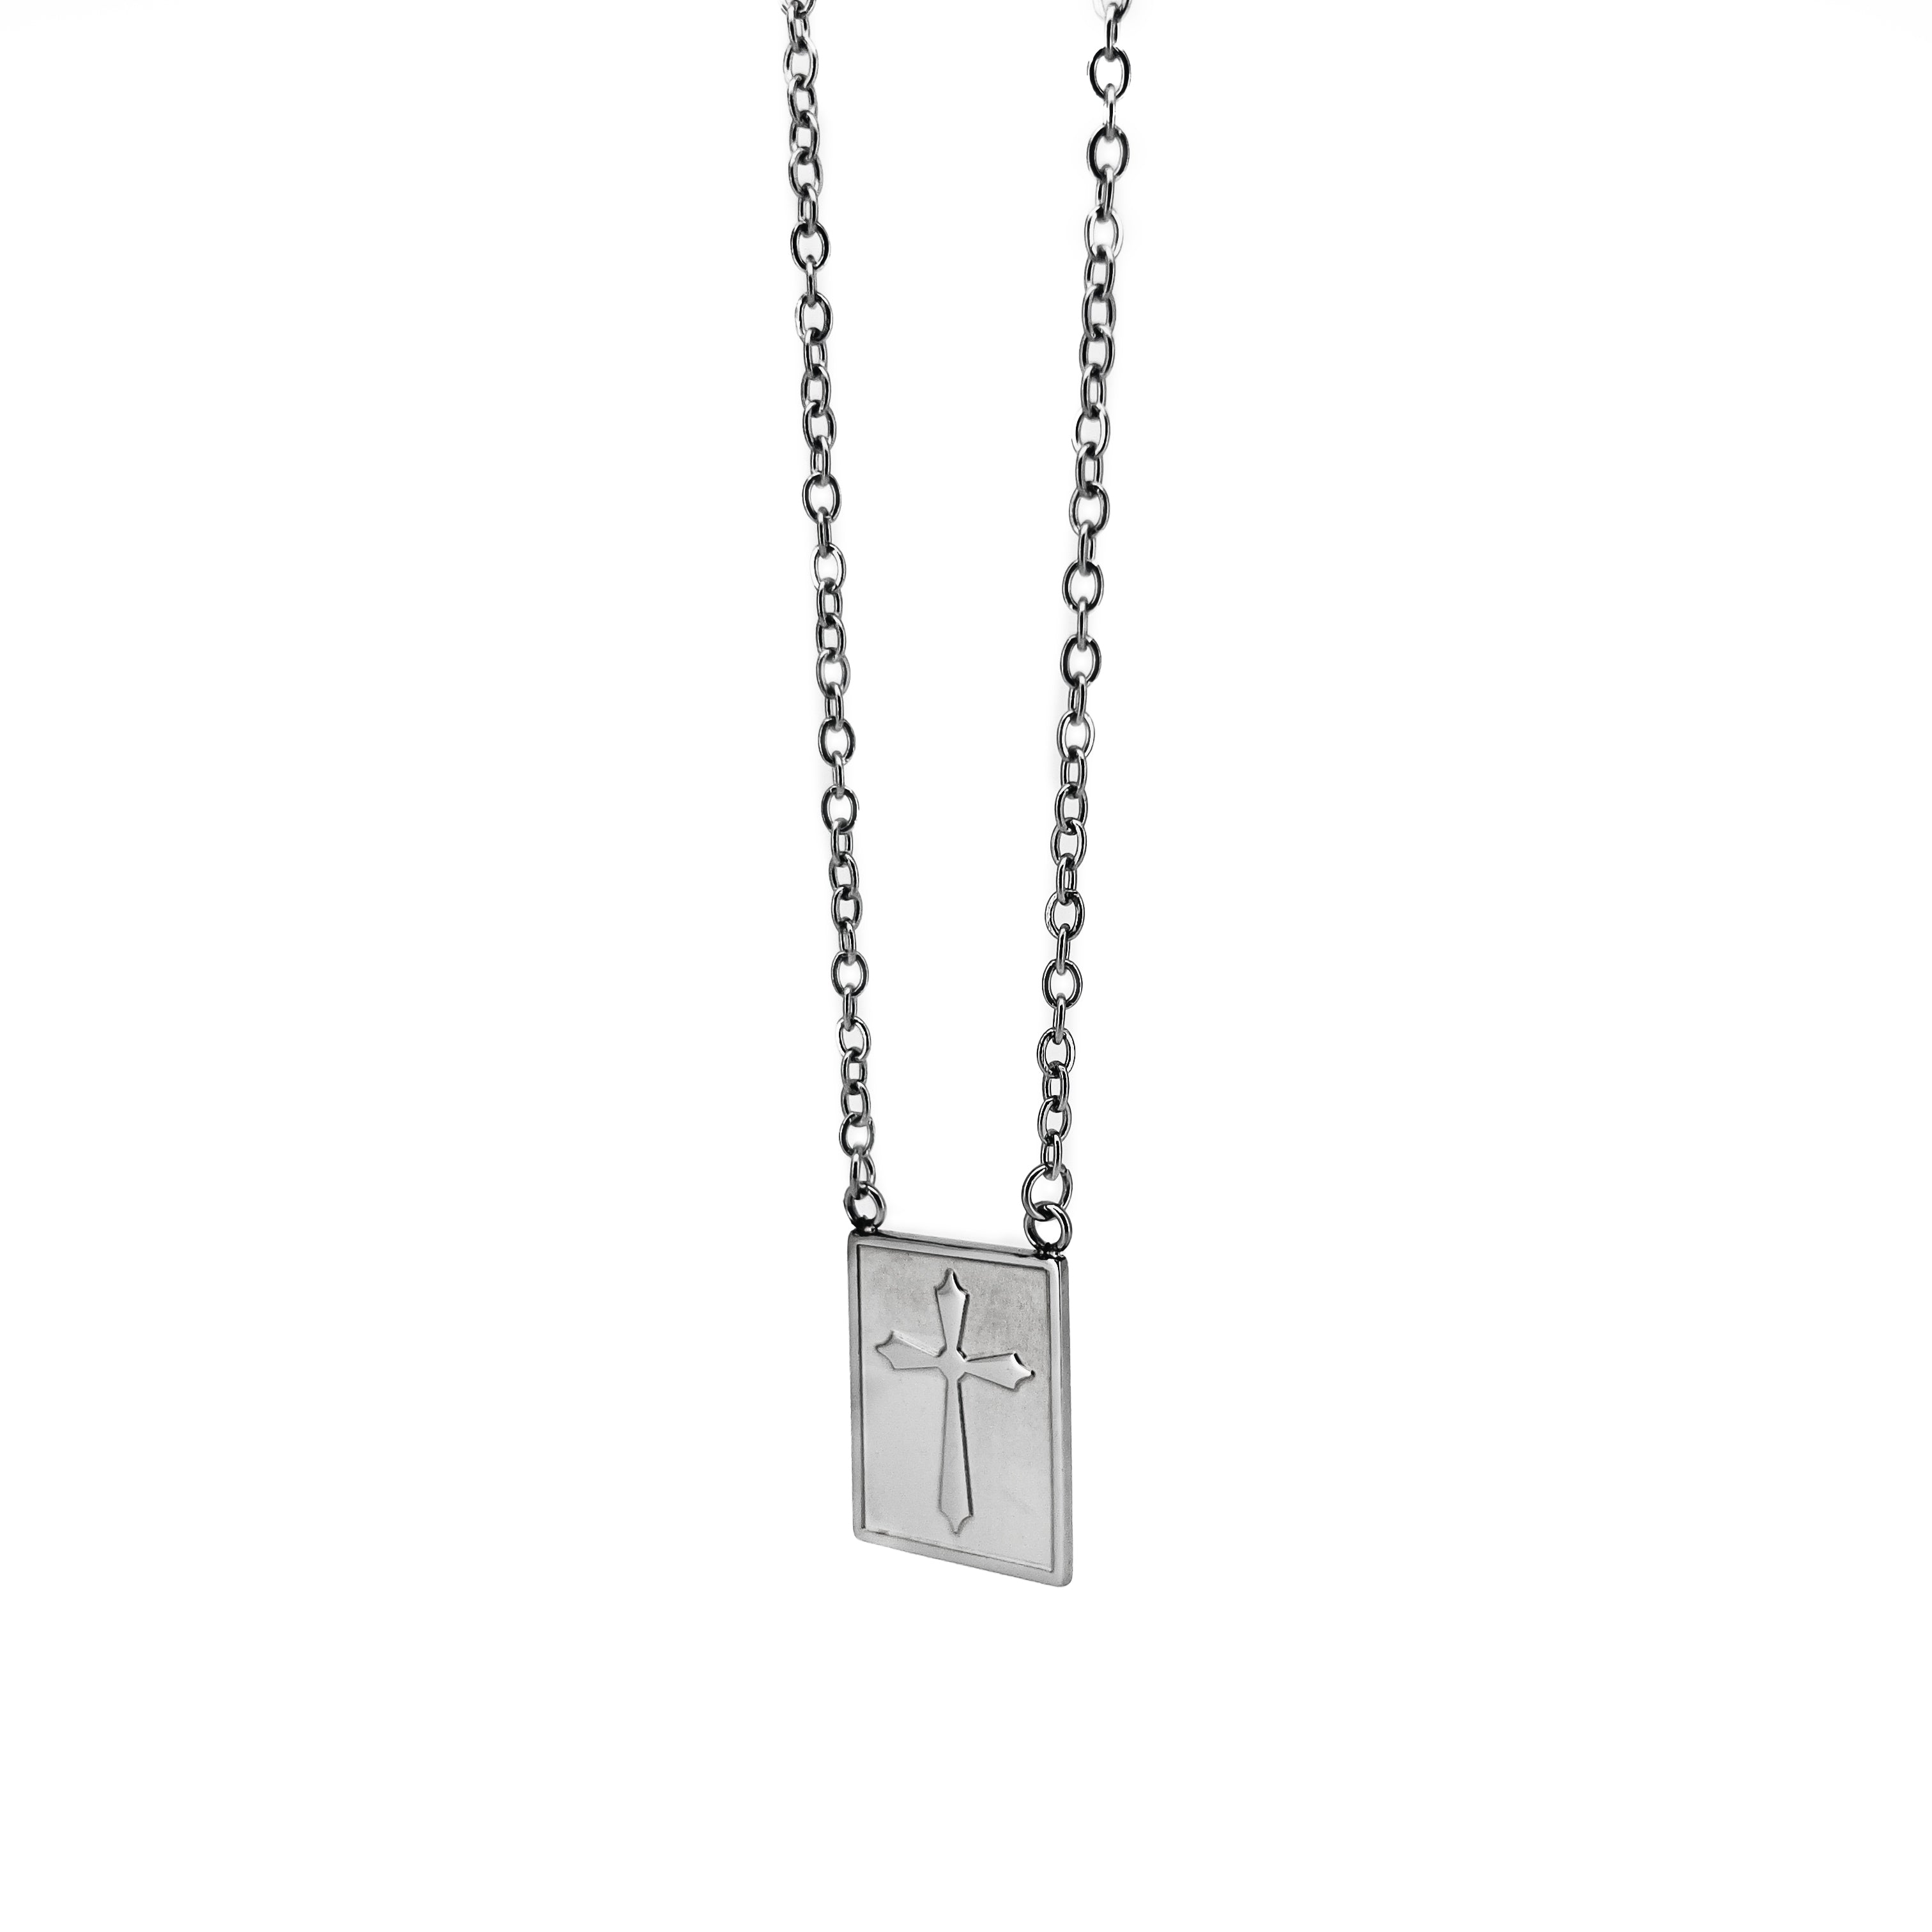 Hector Stainless Steel Chain Necklace with Symbolic Pendant